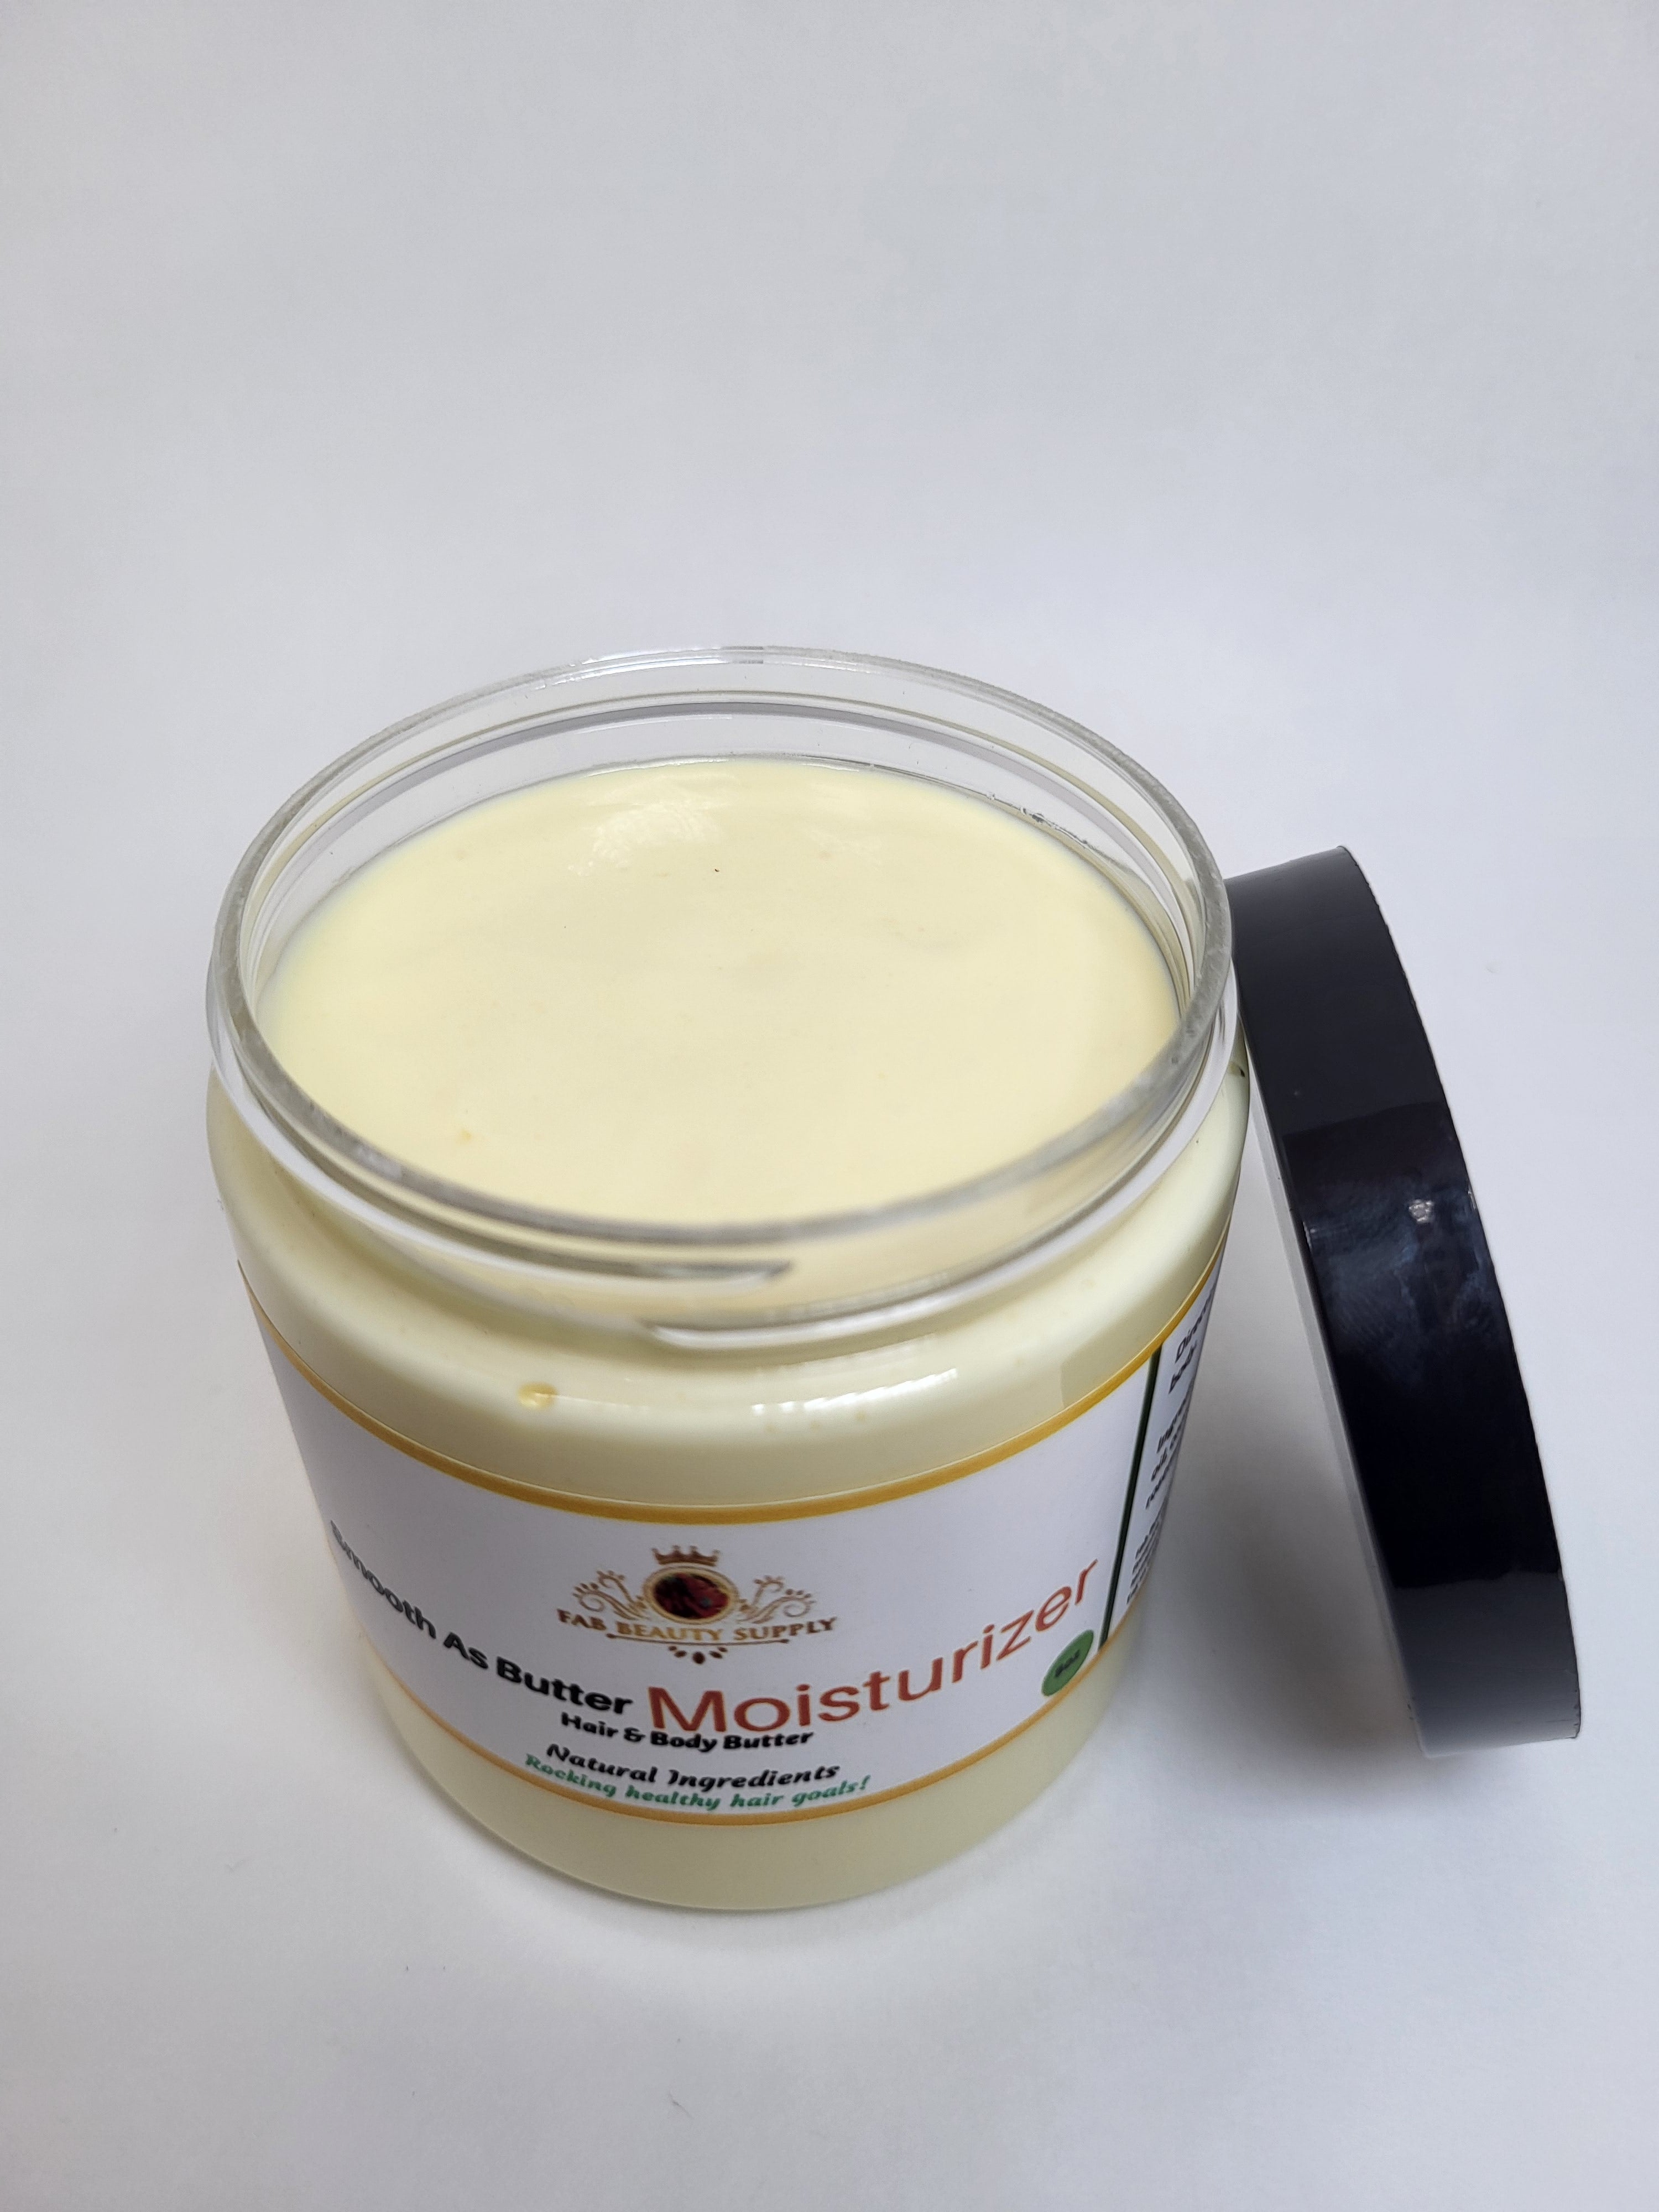 Wholesale: Smooth as Butter Moisturizer